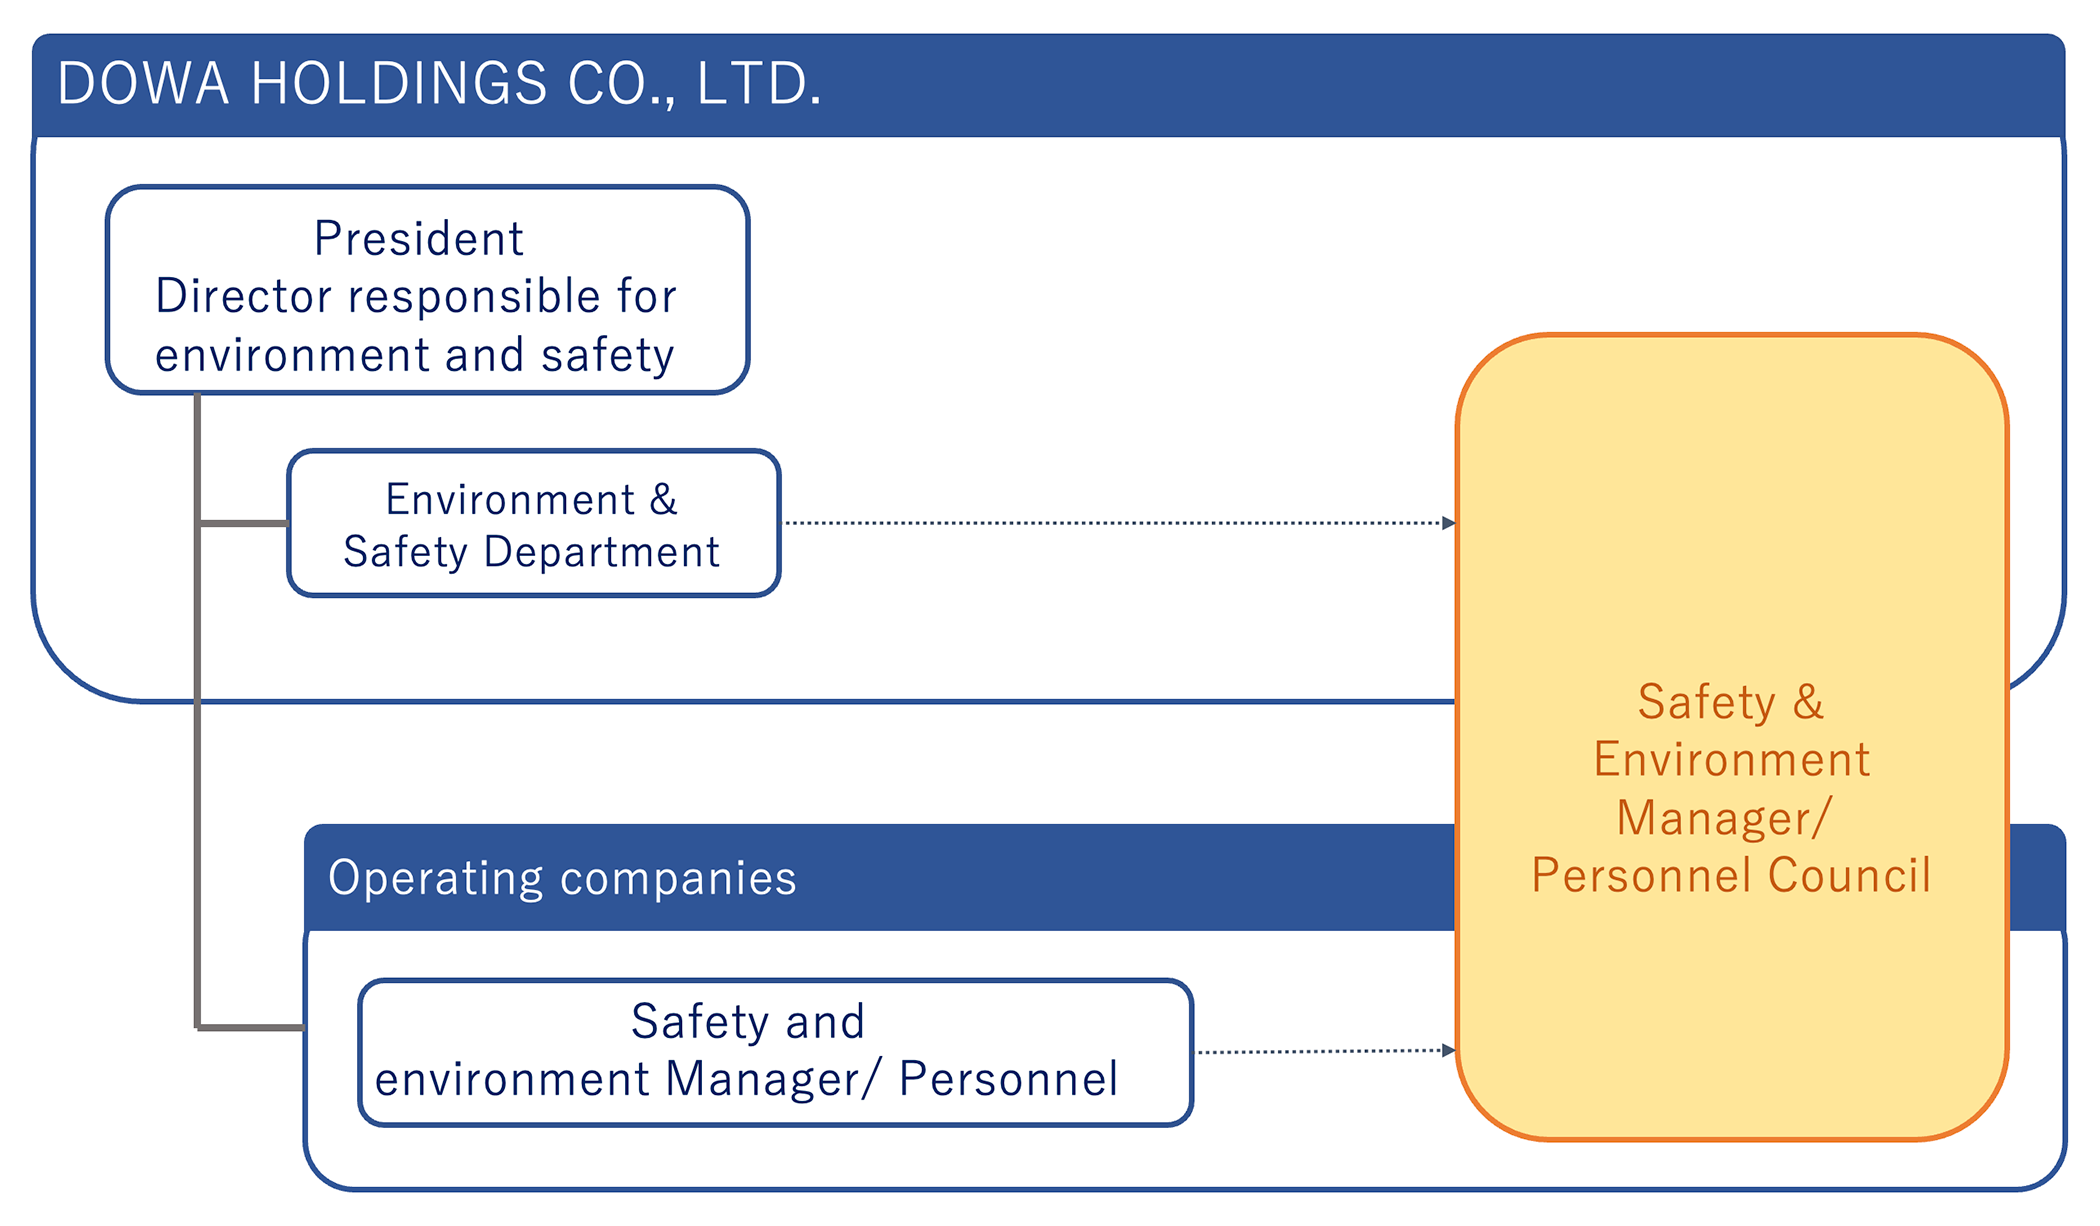 Obtained Environmental Management System